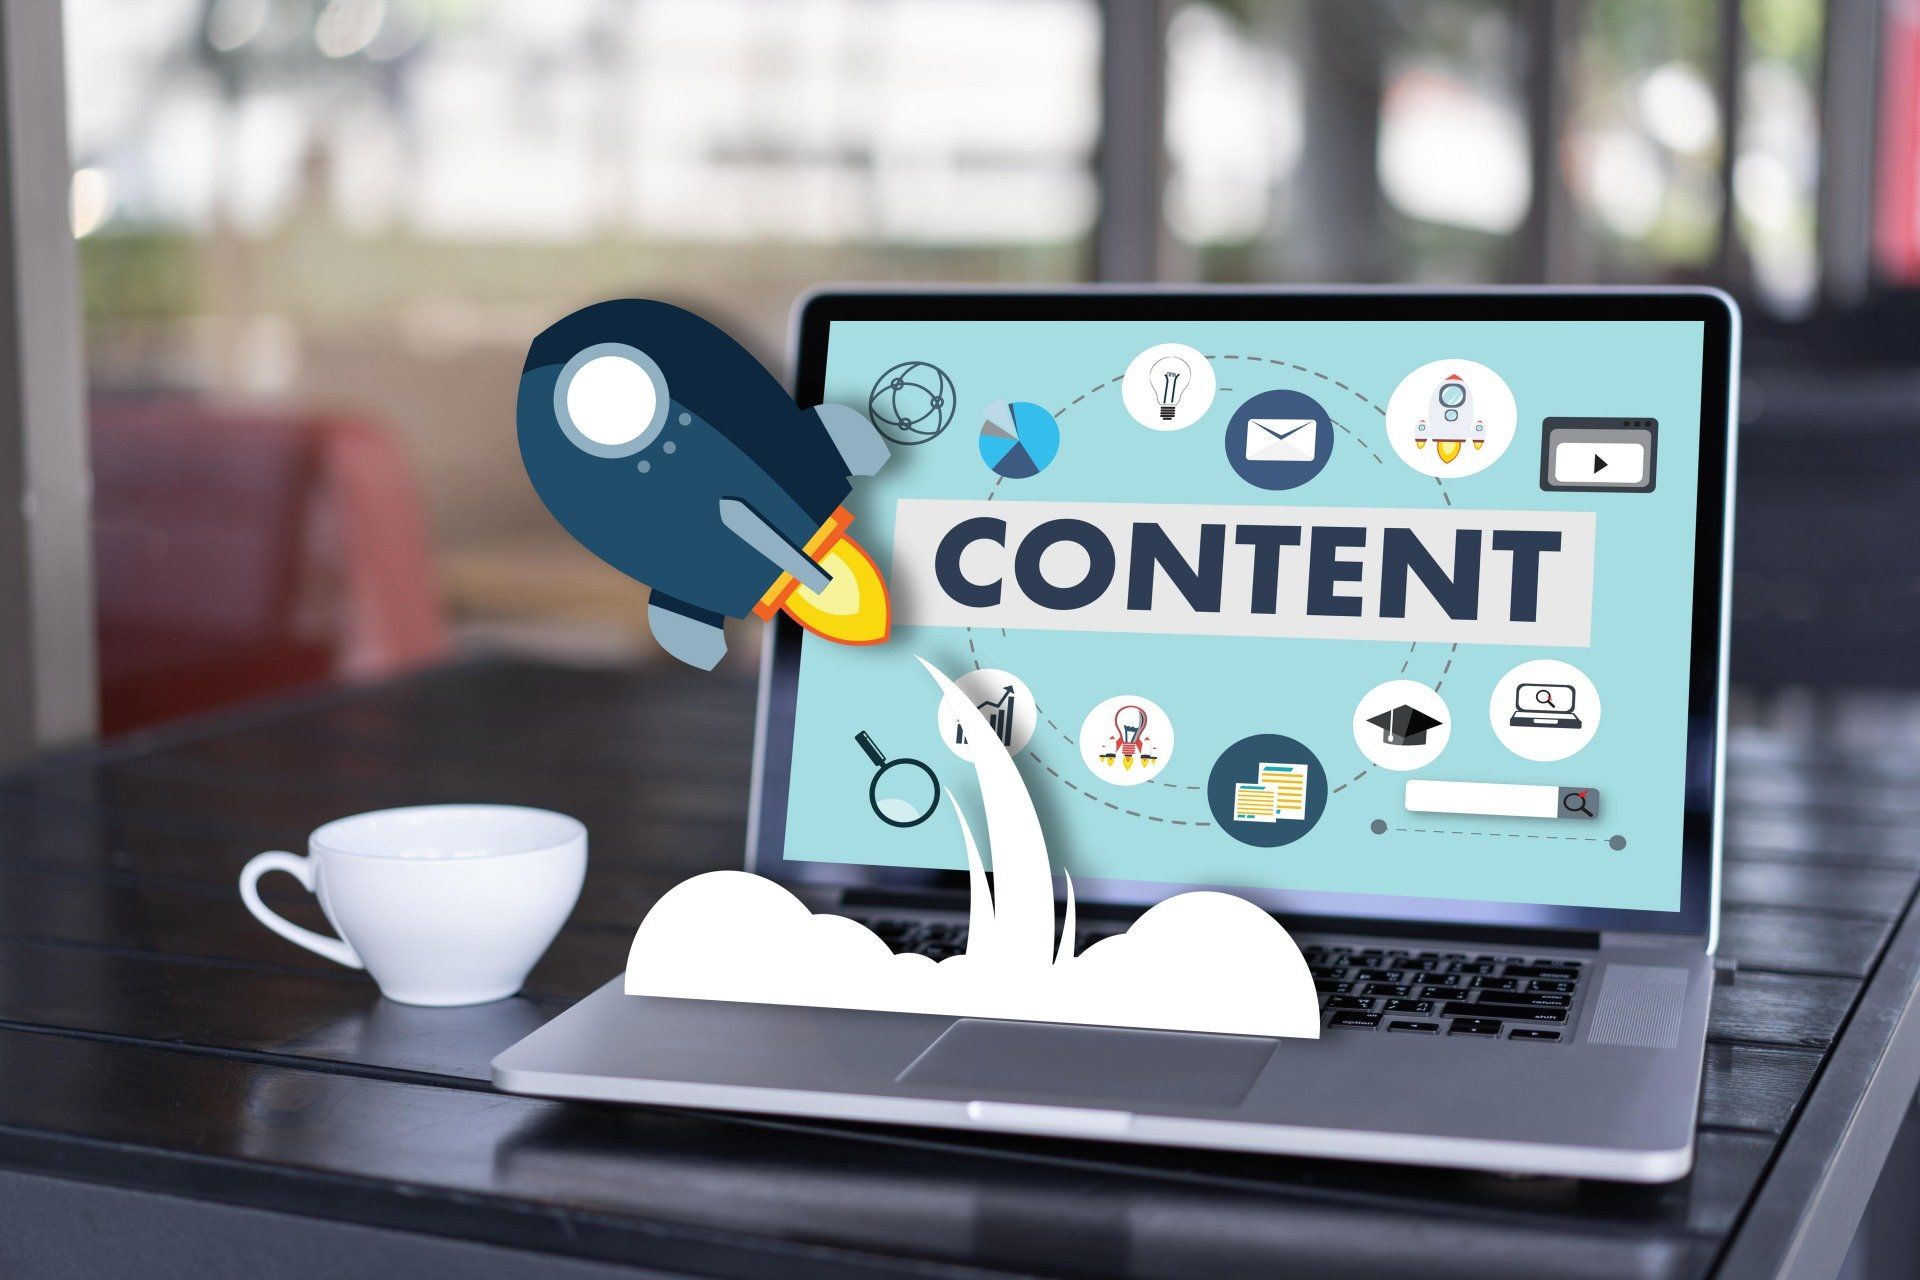 4 Ways to improve your content marketing strategy